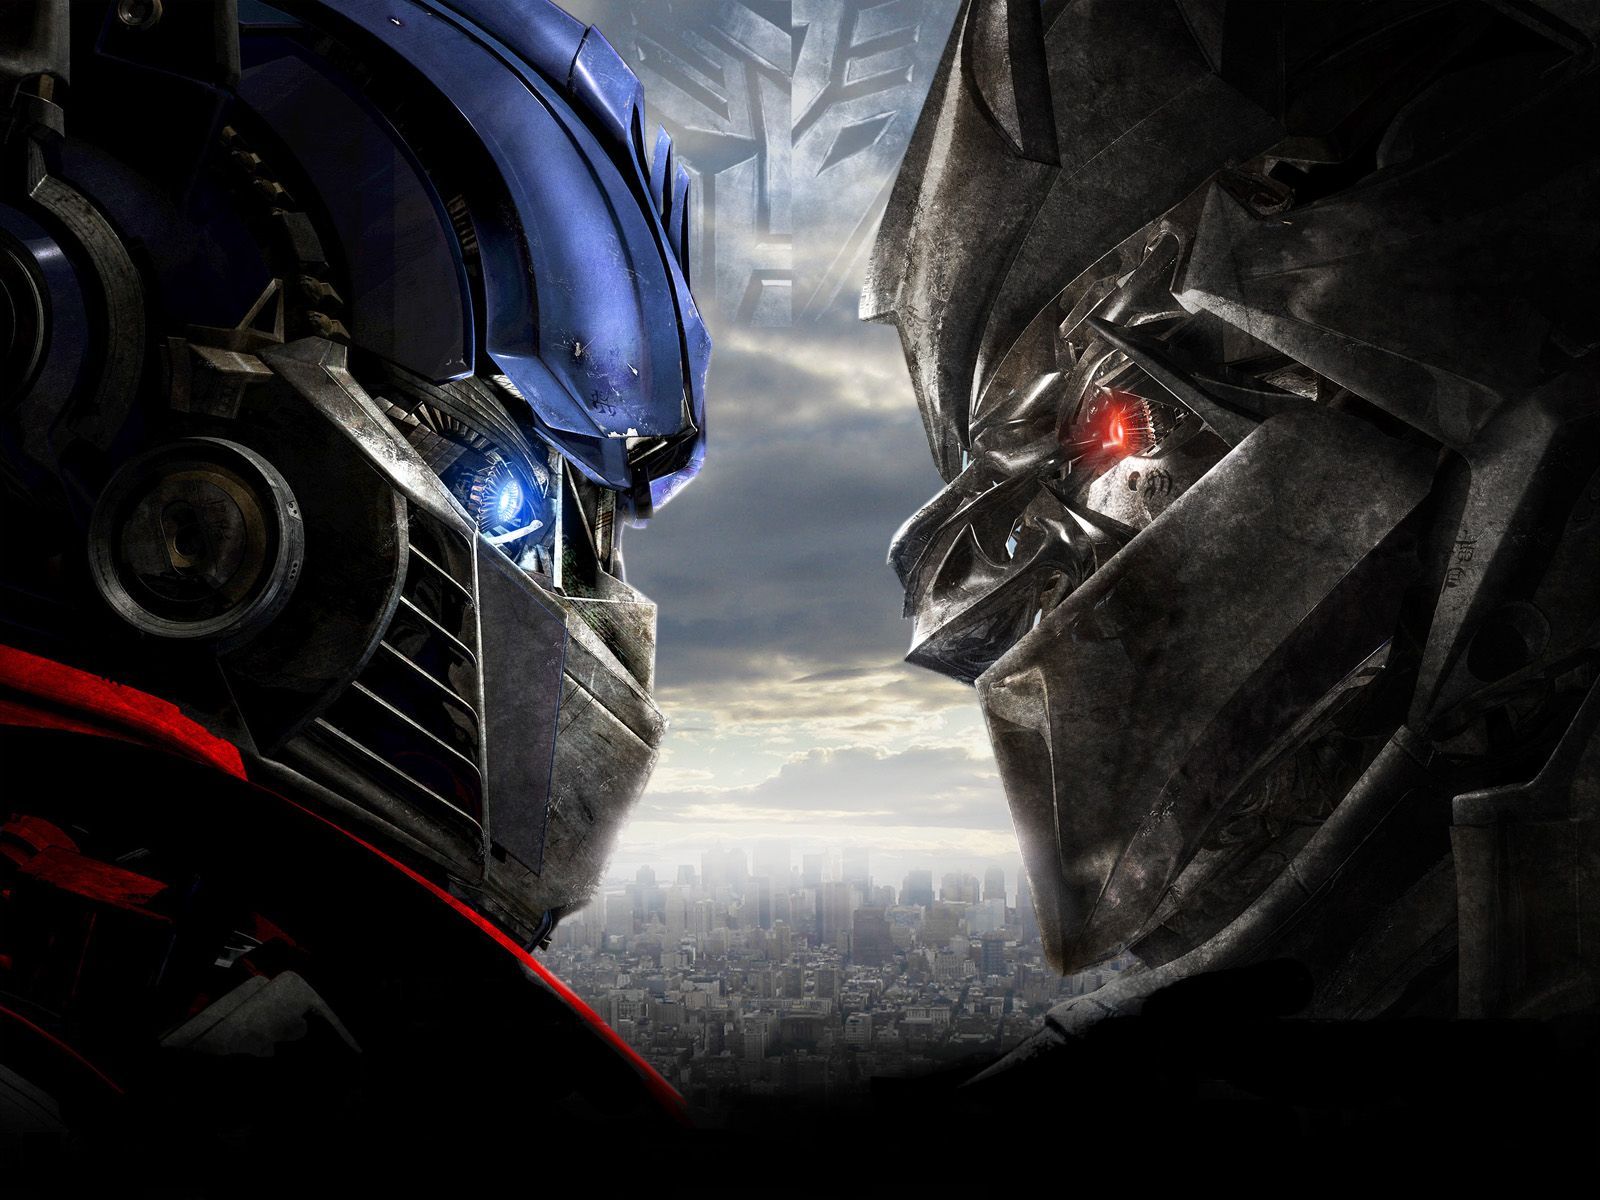 125 Transformers HD Wallpapers | Backgrounds - Wallpaper Abyss